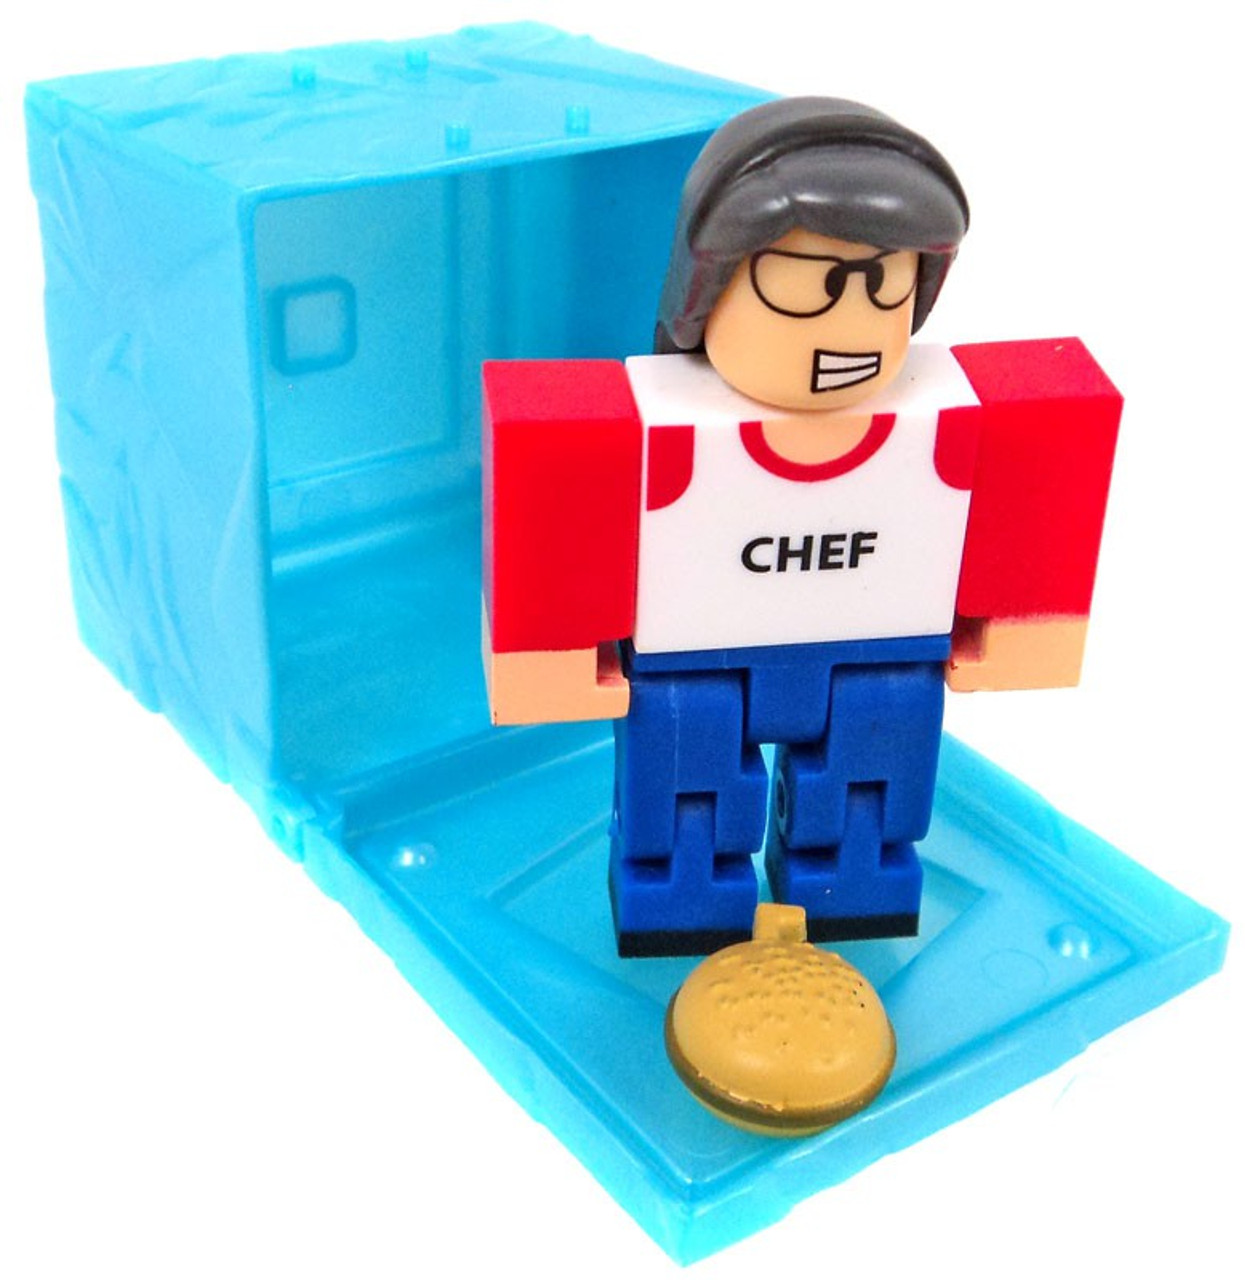 Roblox Red Series 3 High School Life Lunch Lady 3 Mini Figure Blue Cube With Online Code Loose Jazwares Toywiz - promo codes for roblox high school life 2